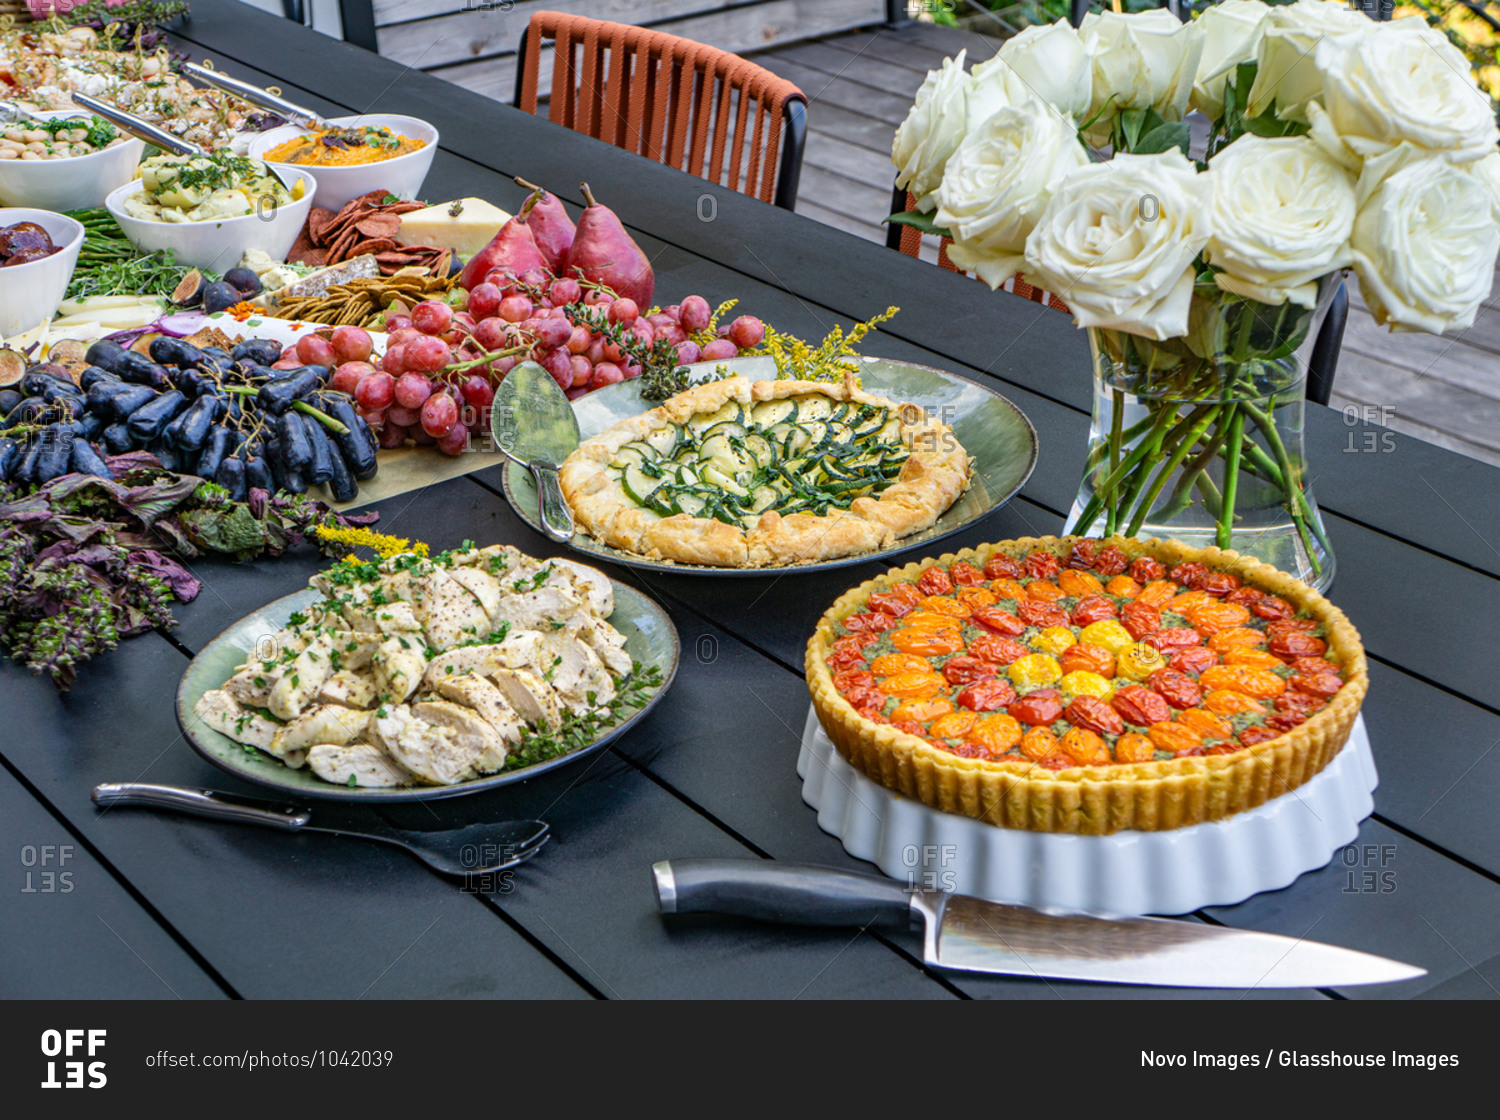 Grazing Board with Charcuterie, Tarts, Fruits and Vegetables on Table in Outdoor Setting